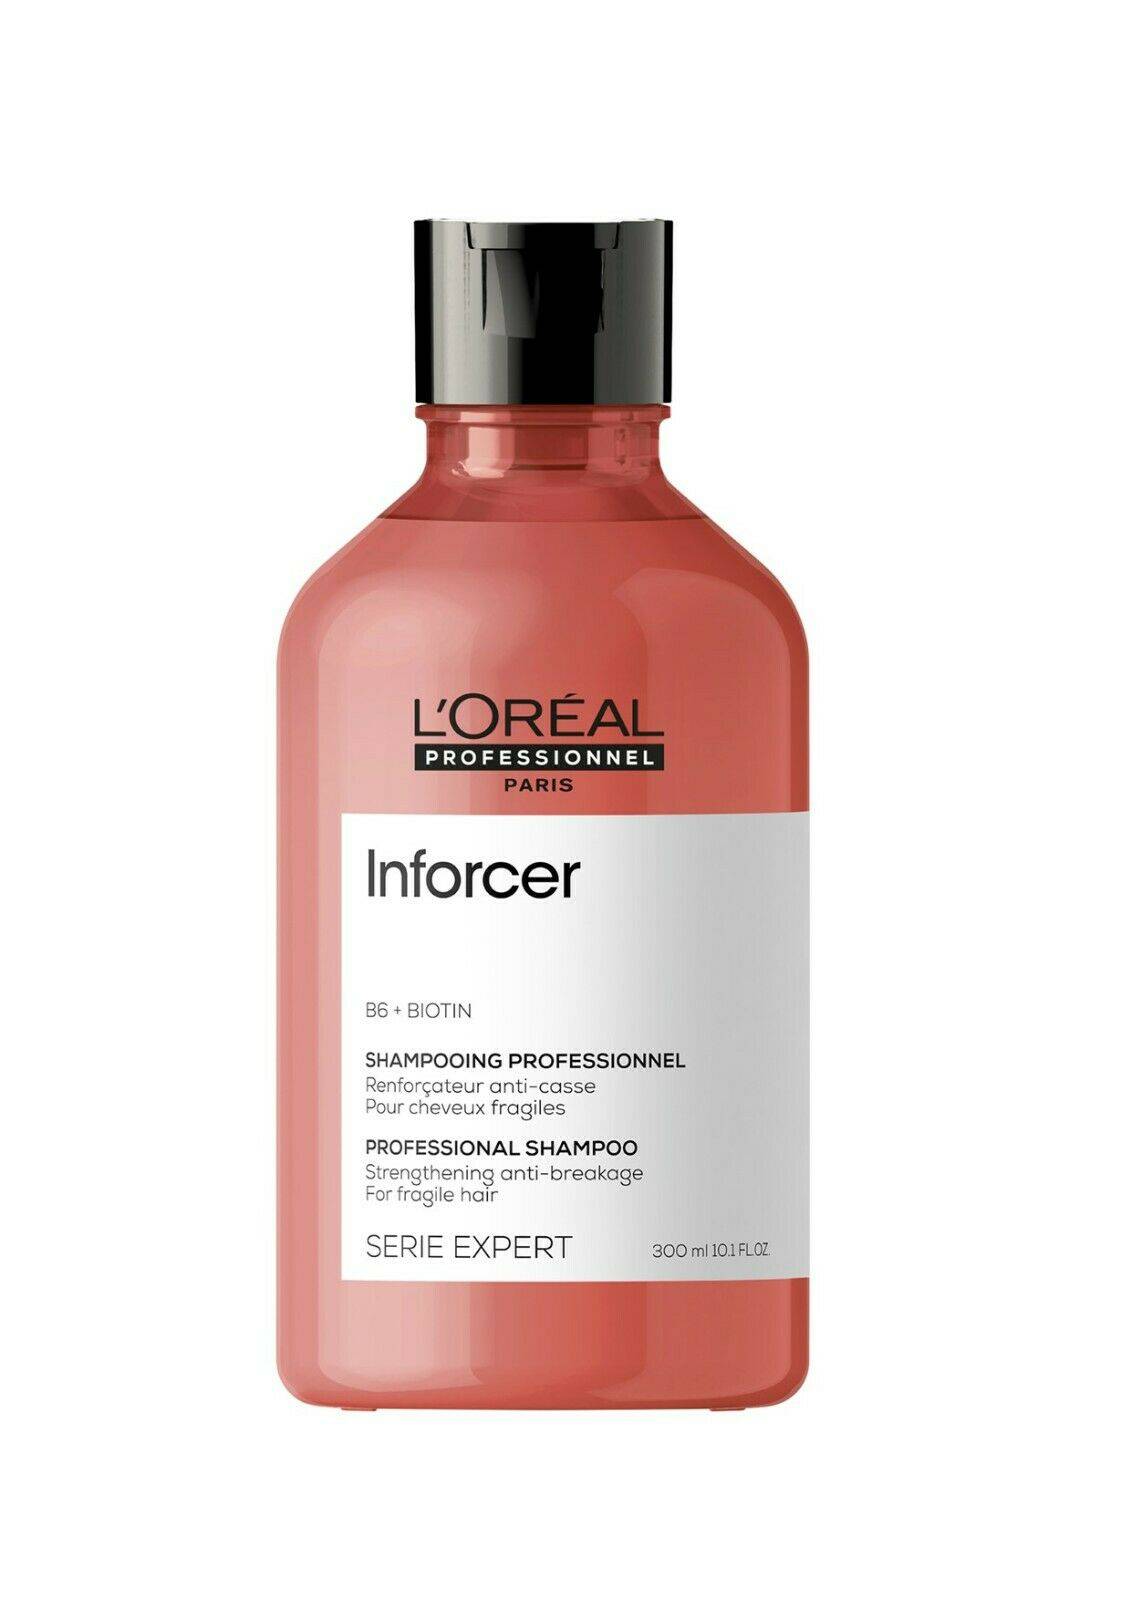 Loreal Professionnel Inforcer B6 + Biotin Strength Shampoo Condition Mask  Trio L'Oréal Professionnel - On Line Hair Depot